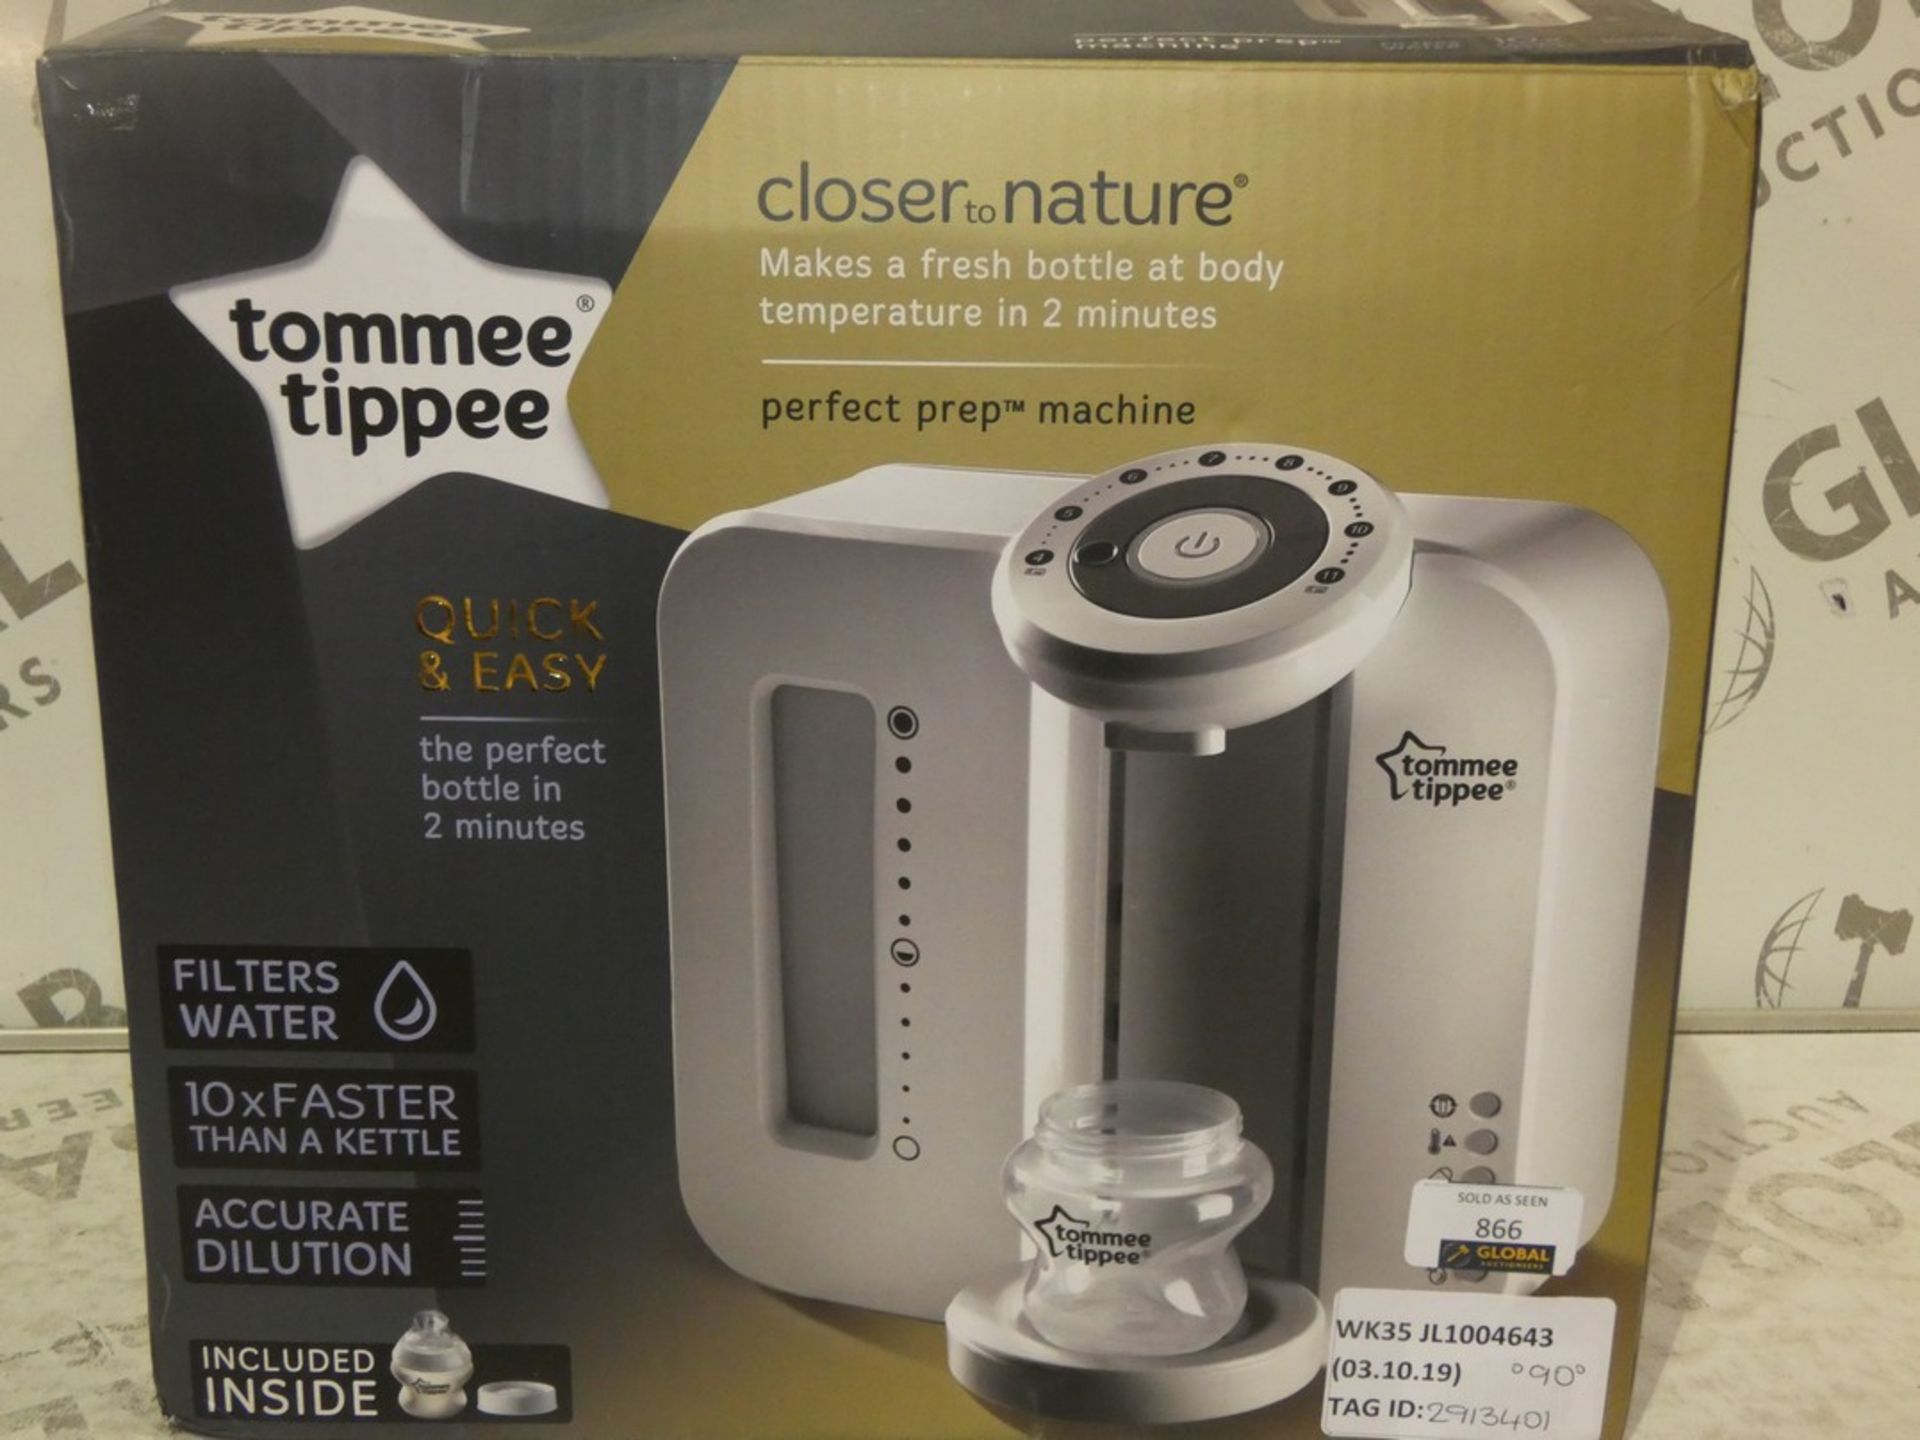 Boxed Tommee Tippee Closer to Nature Perfect Preparation Bottle Warming Station RRP £90 (